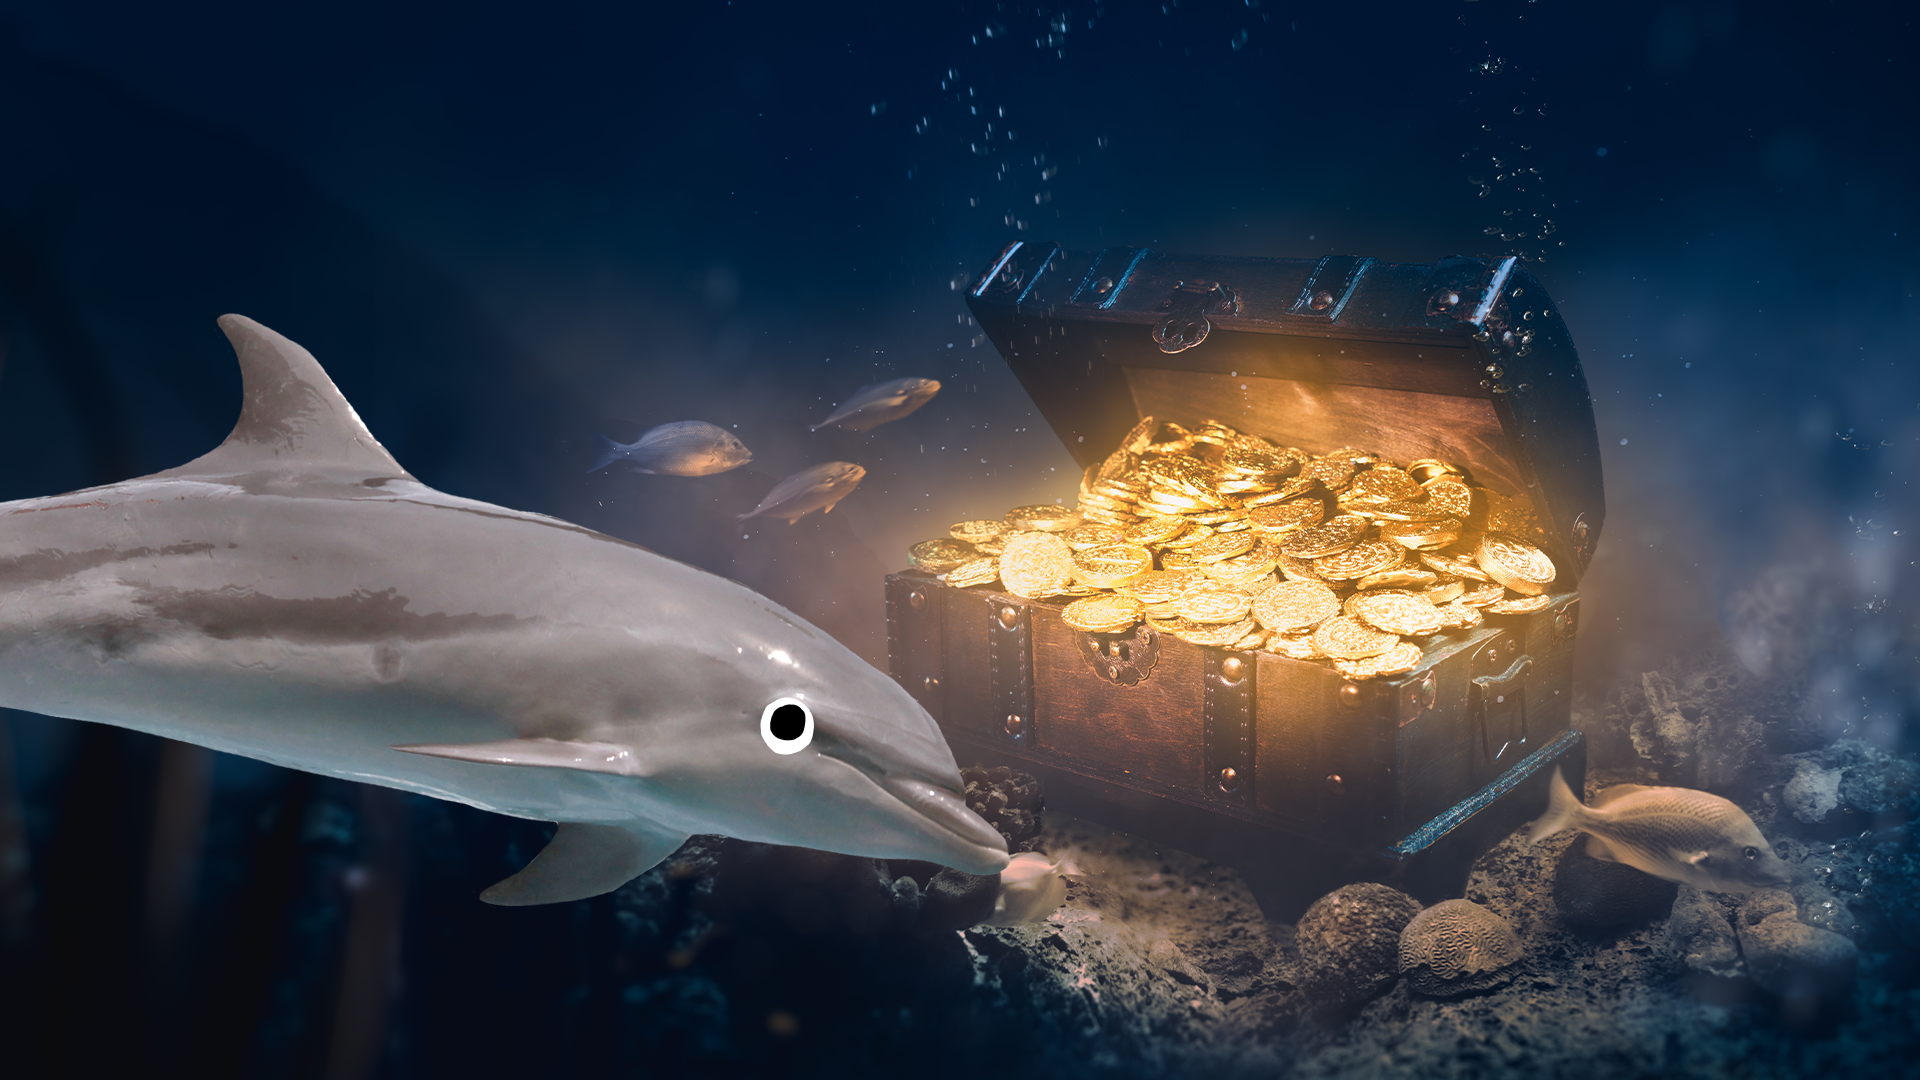 Dolphin and underwater treasure chest